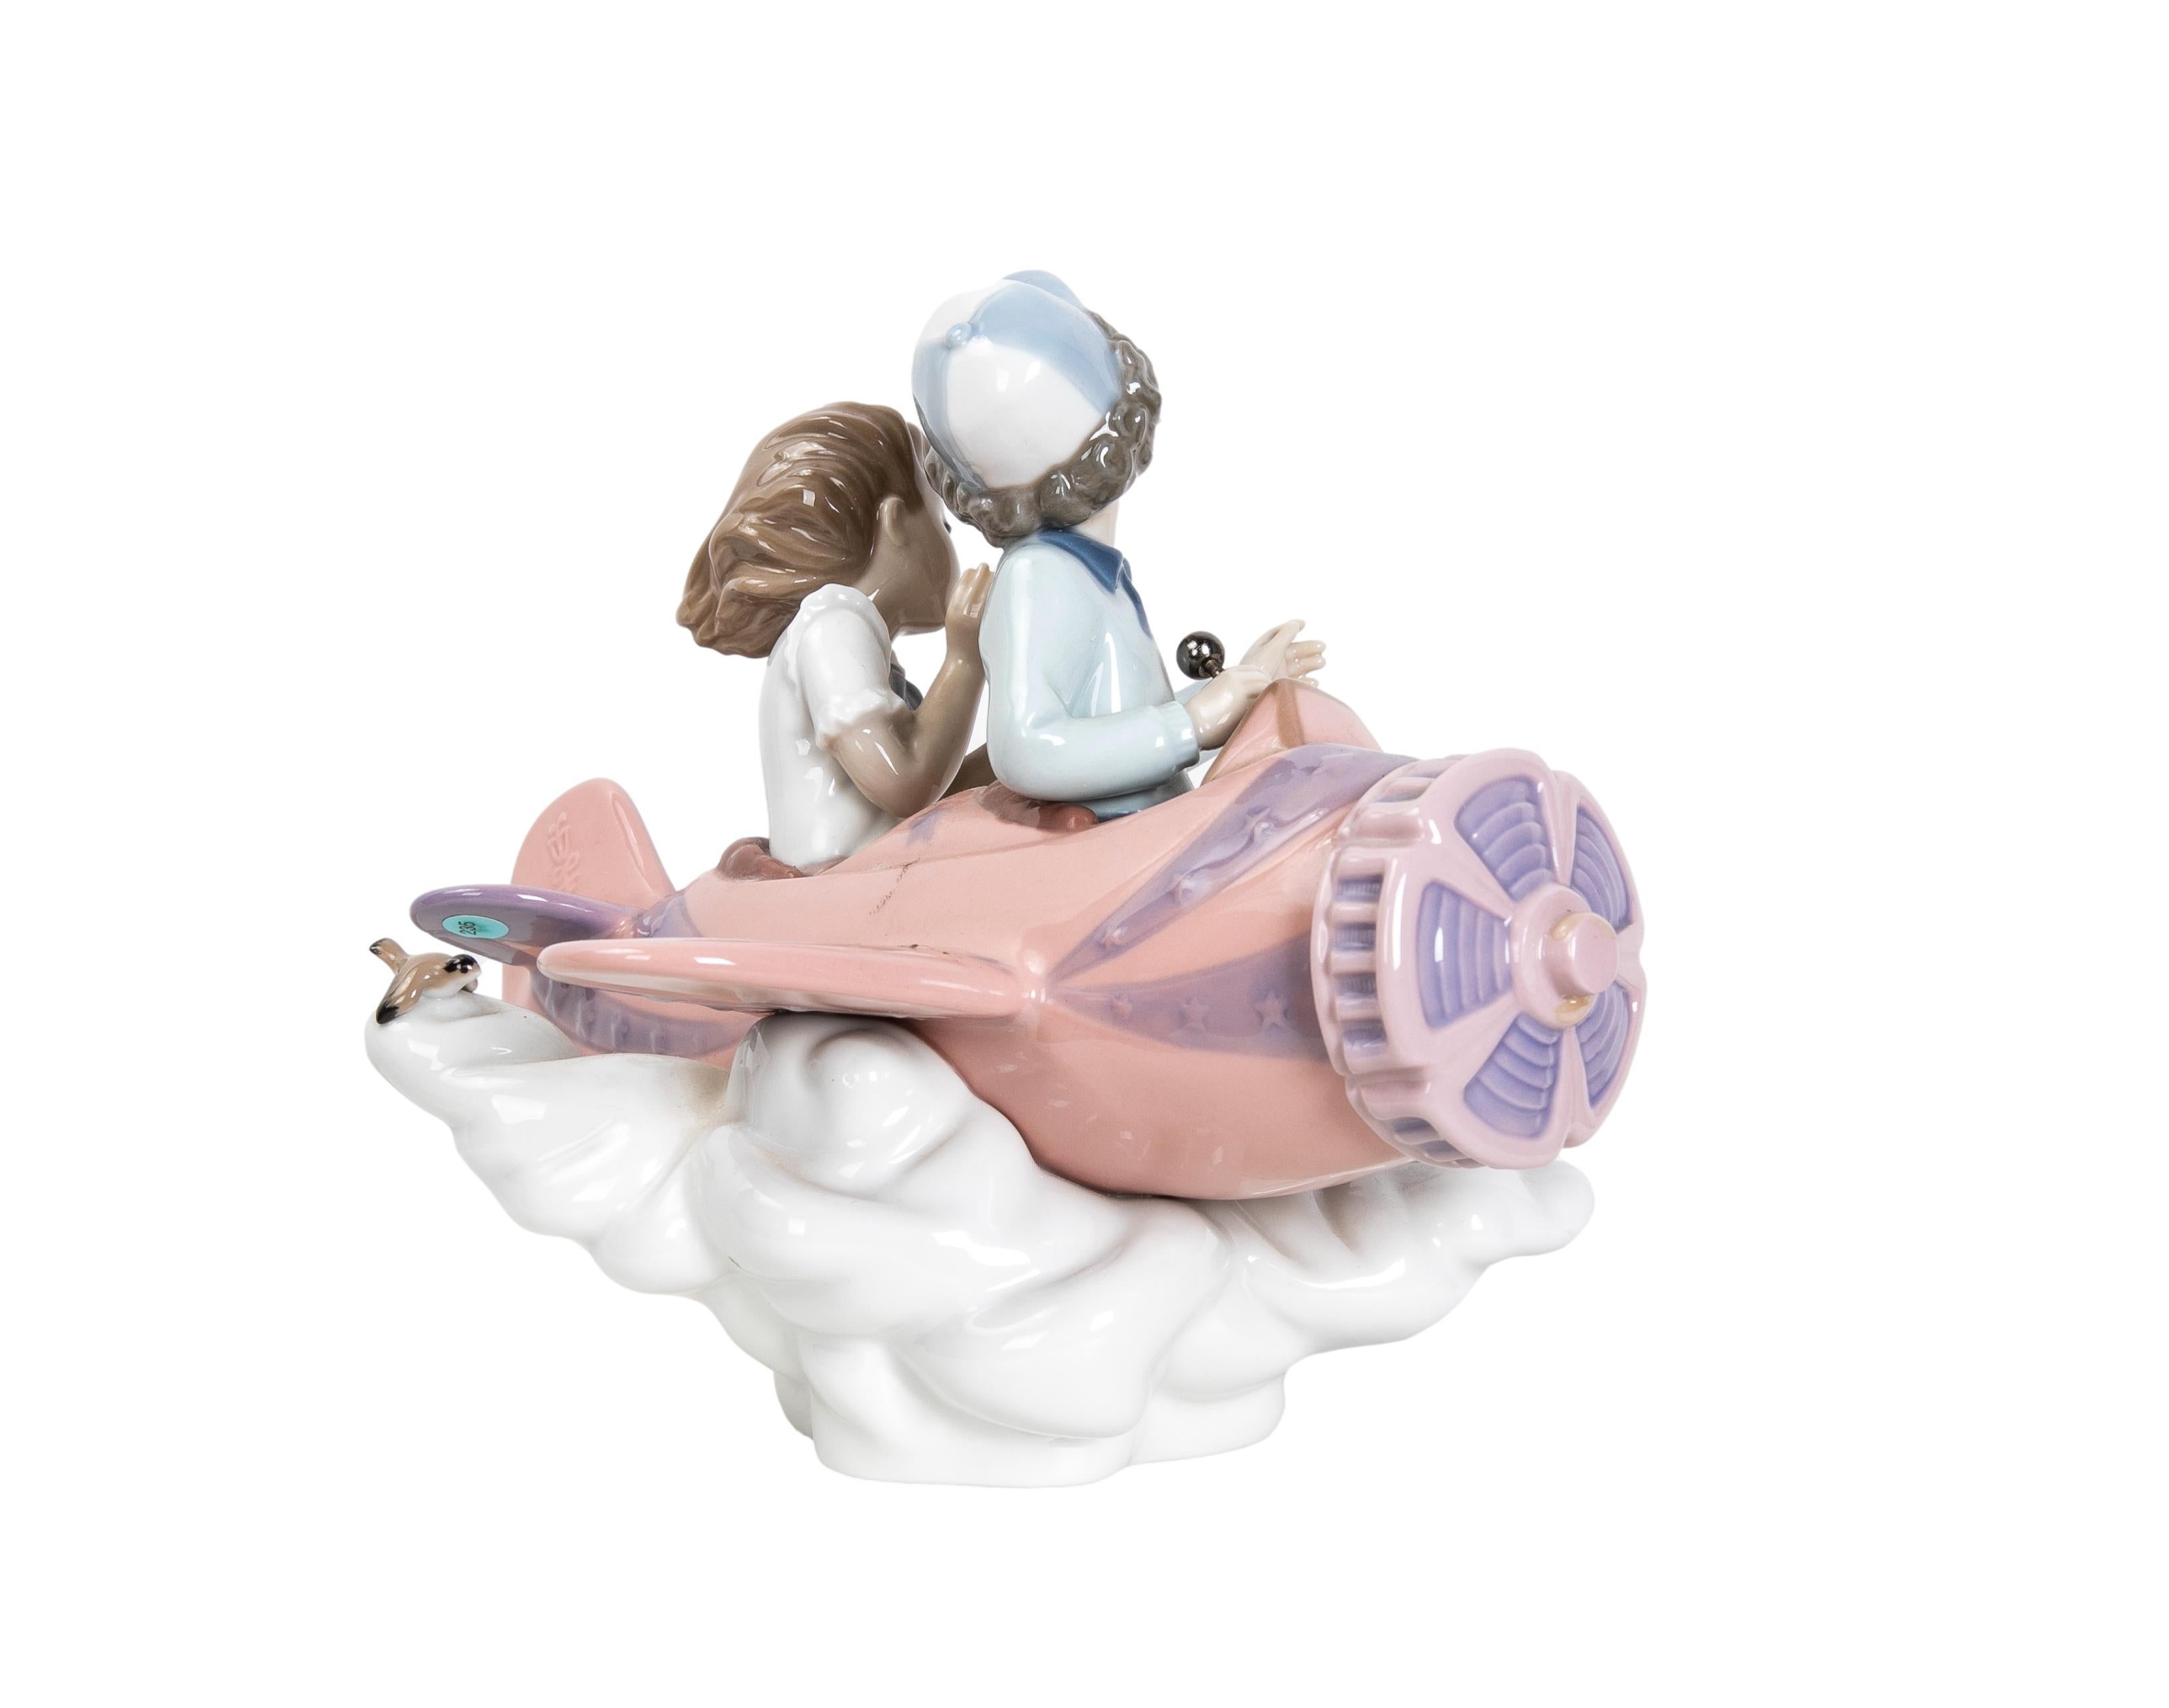 1989 Porcelain Figure of Children in Airplane Signed by the House of LLadró For Sale 1